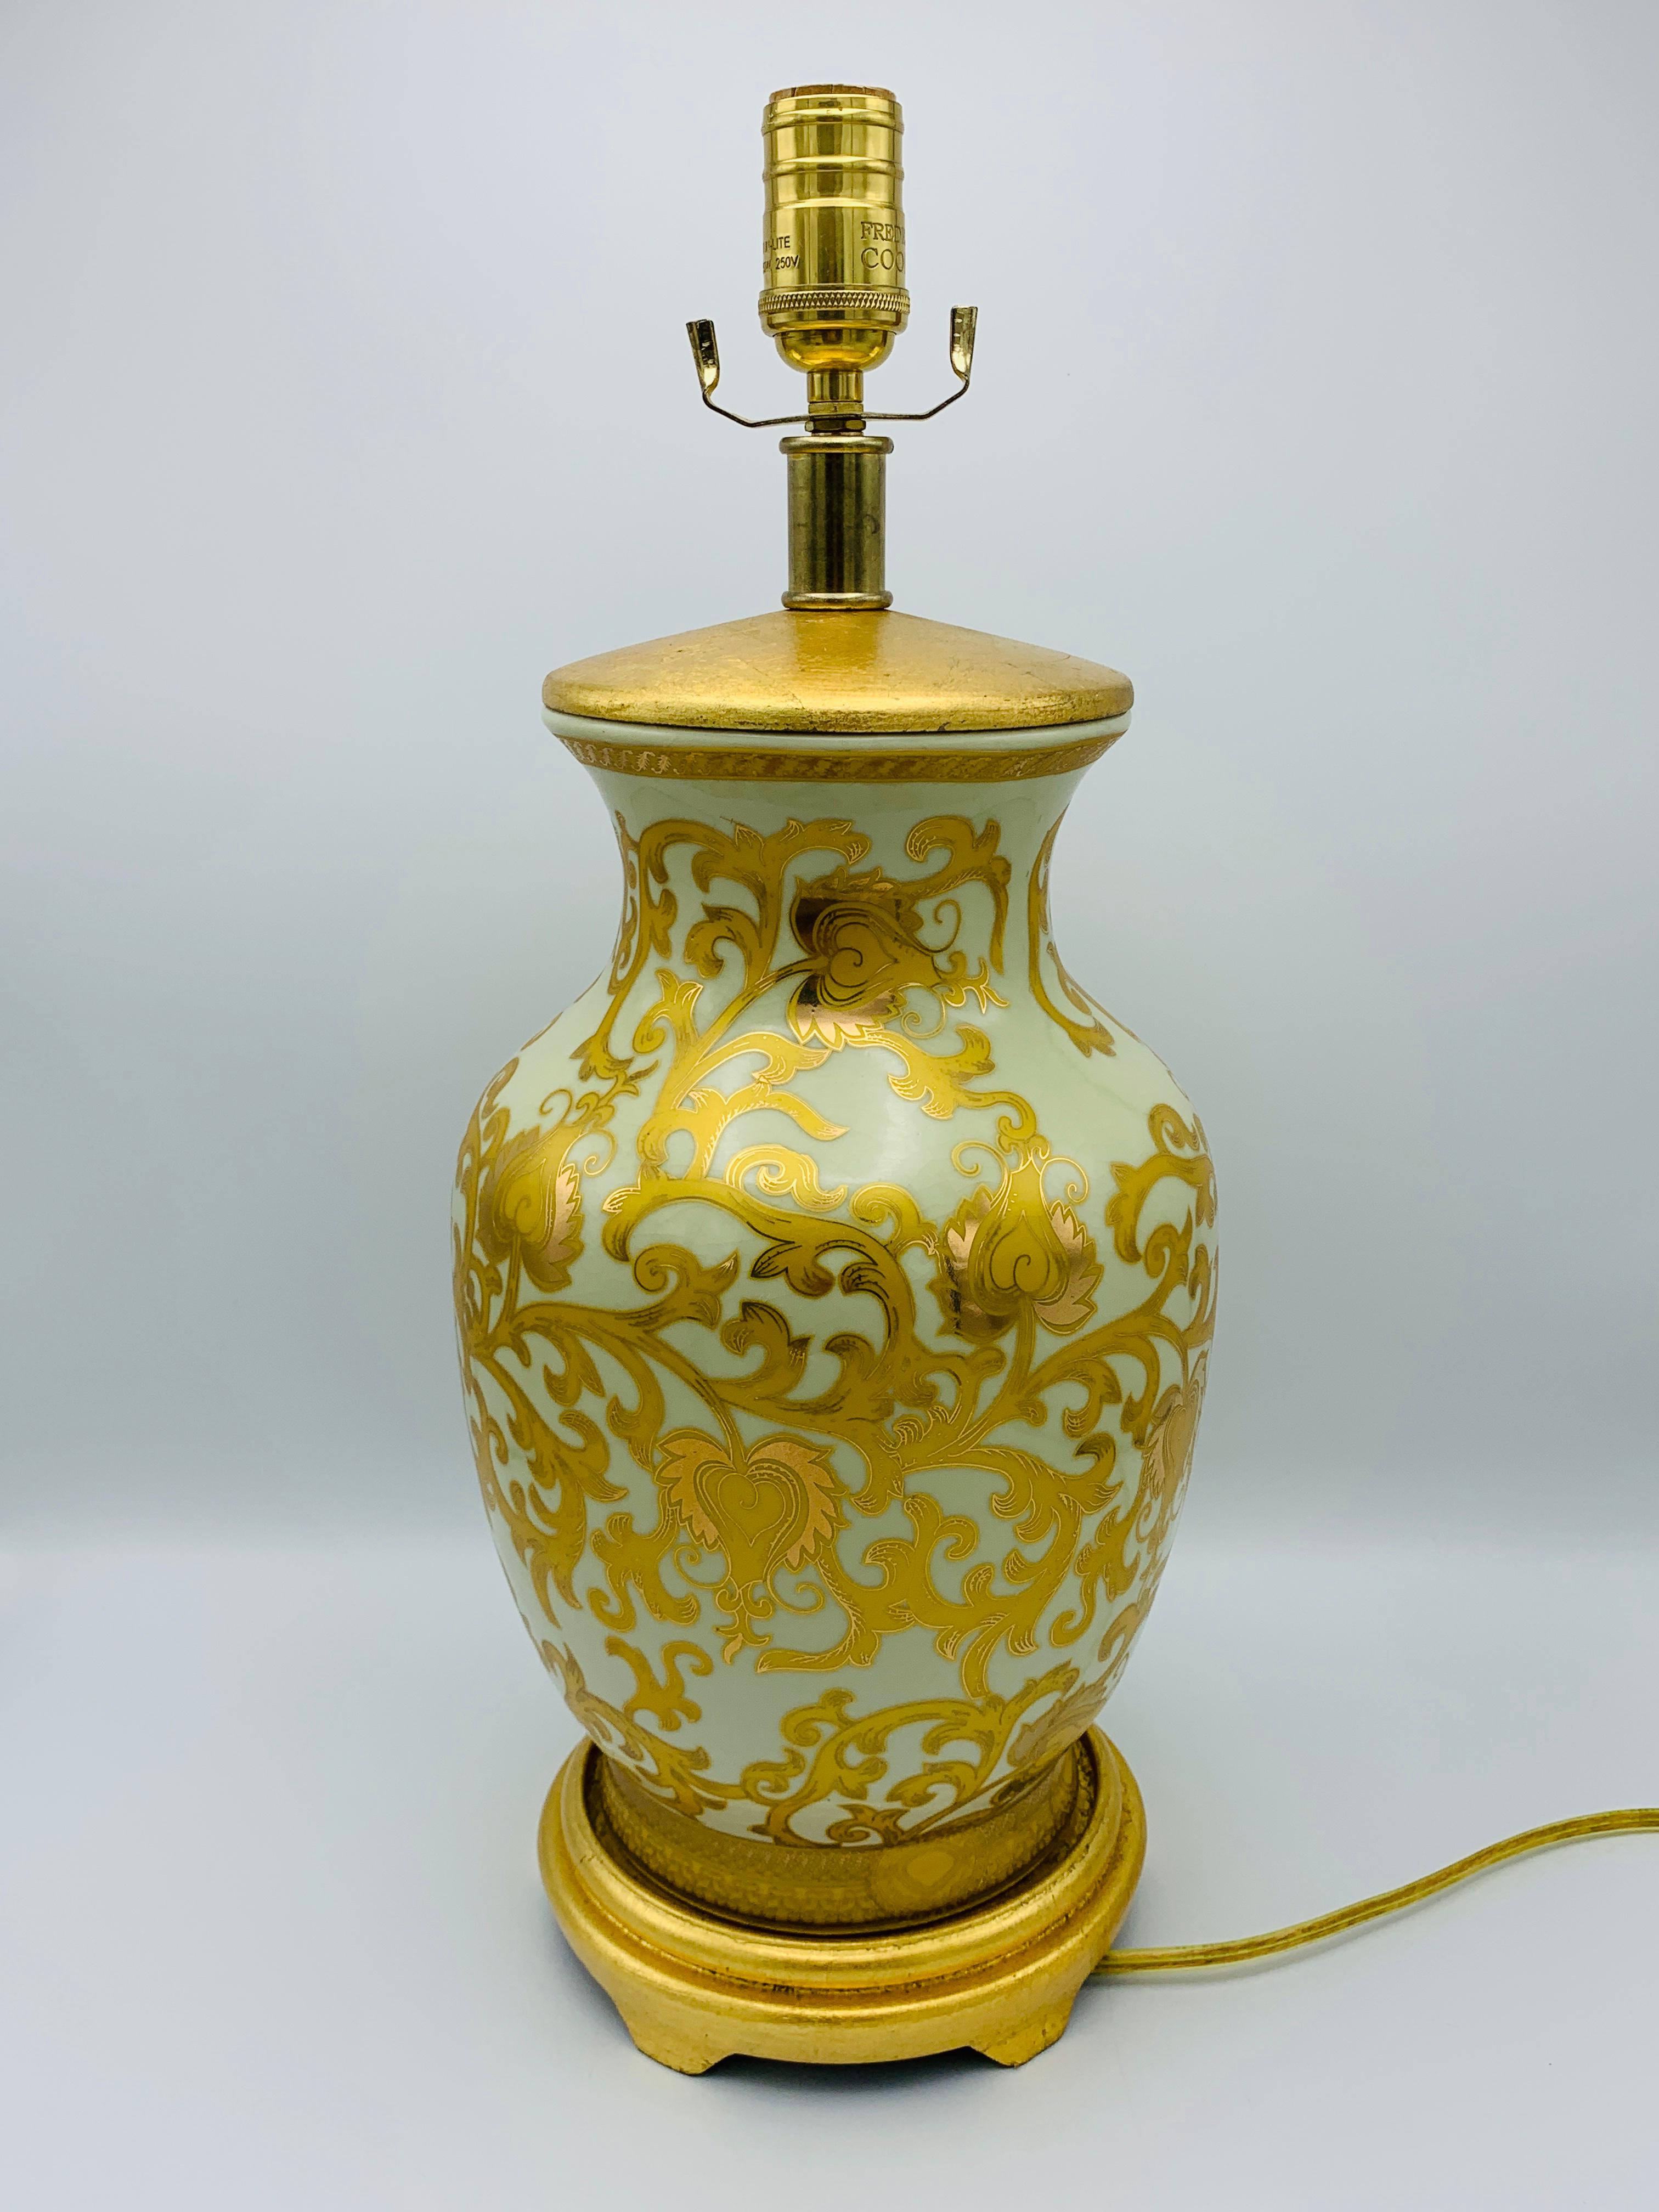 1980s Frederick Cooper Gold Damask Urn Lamp with Gilt Detailing For Sale 3